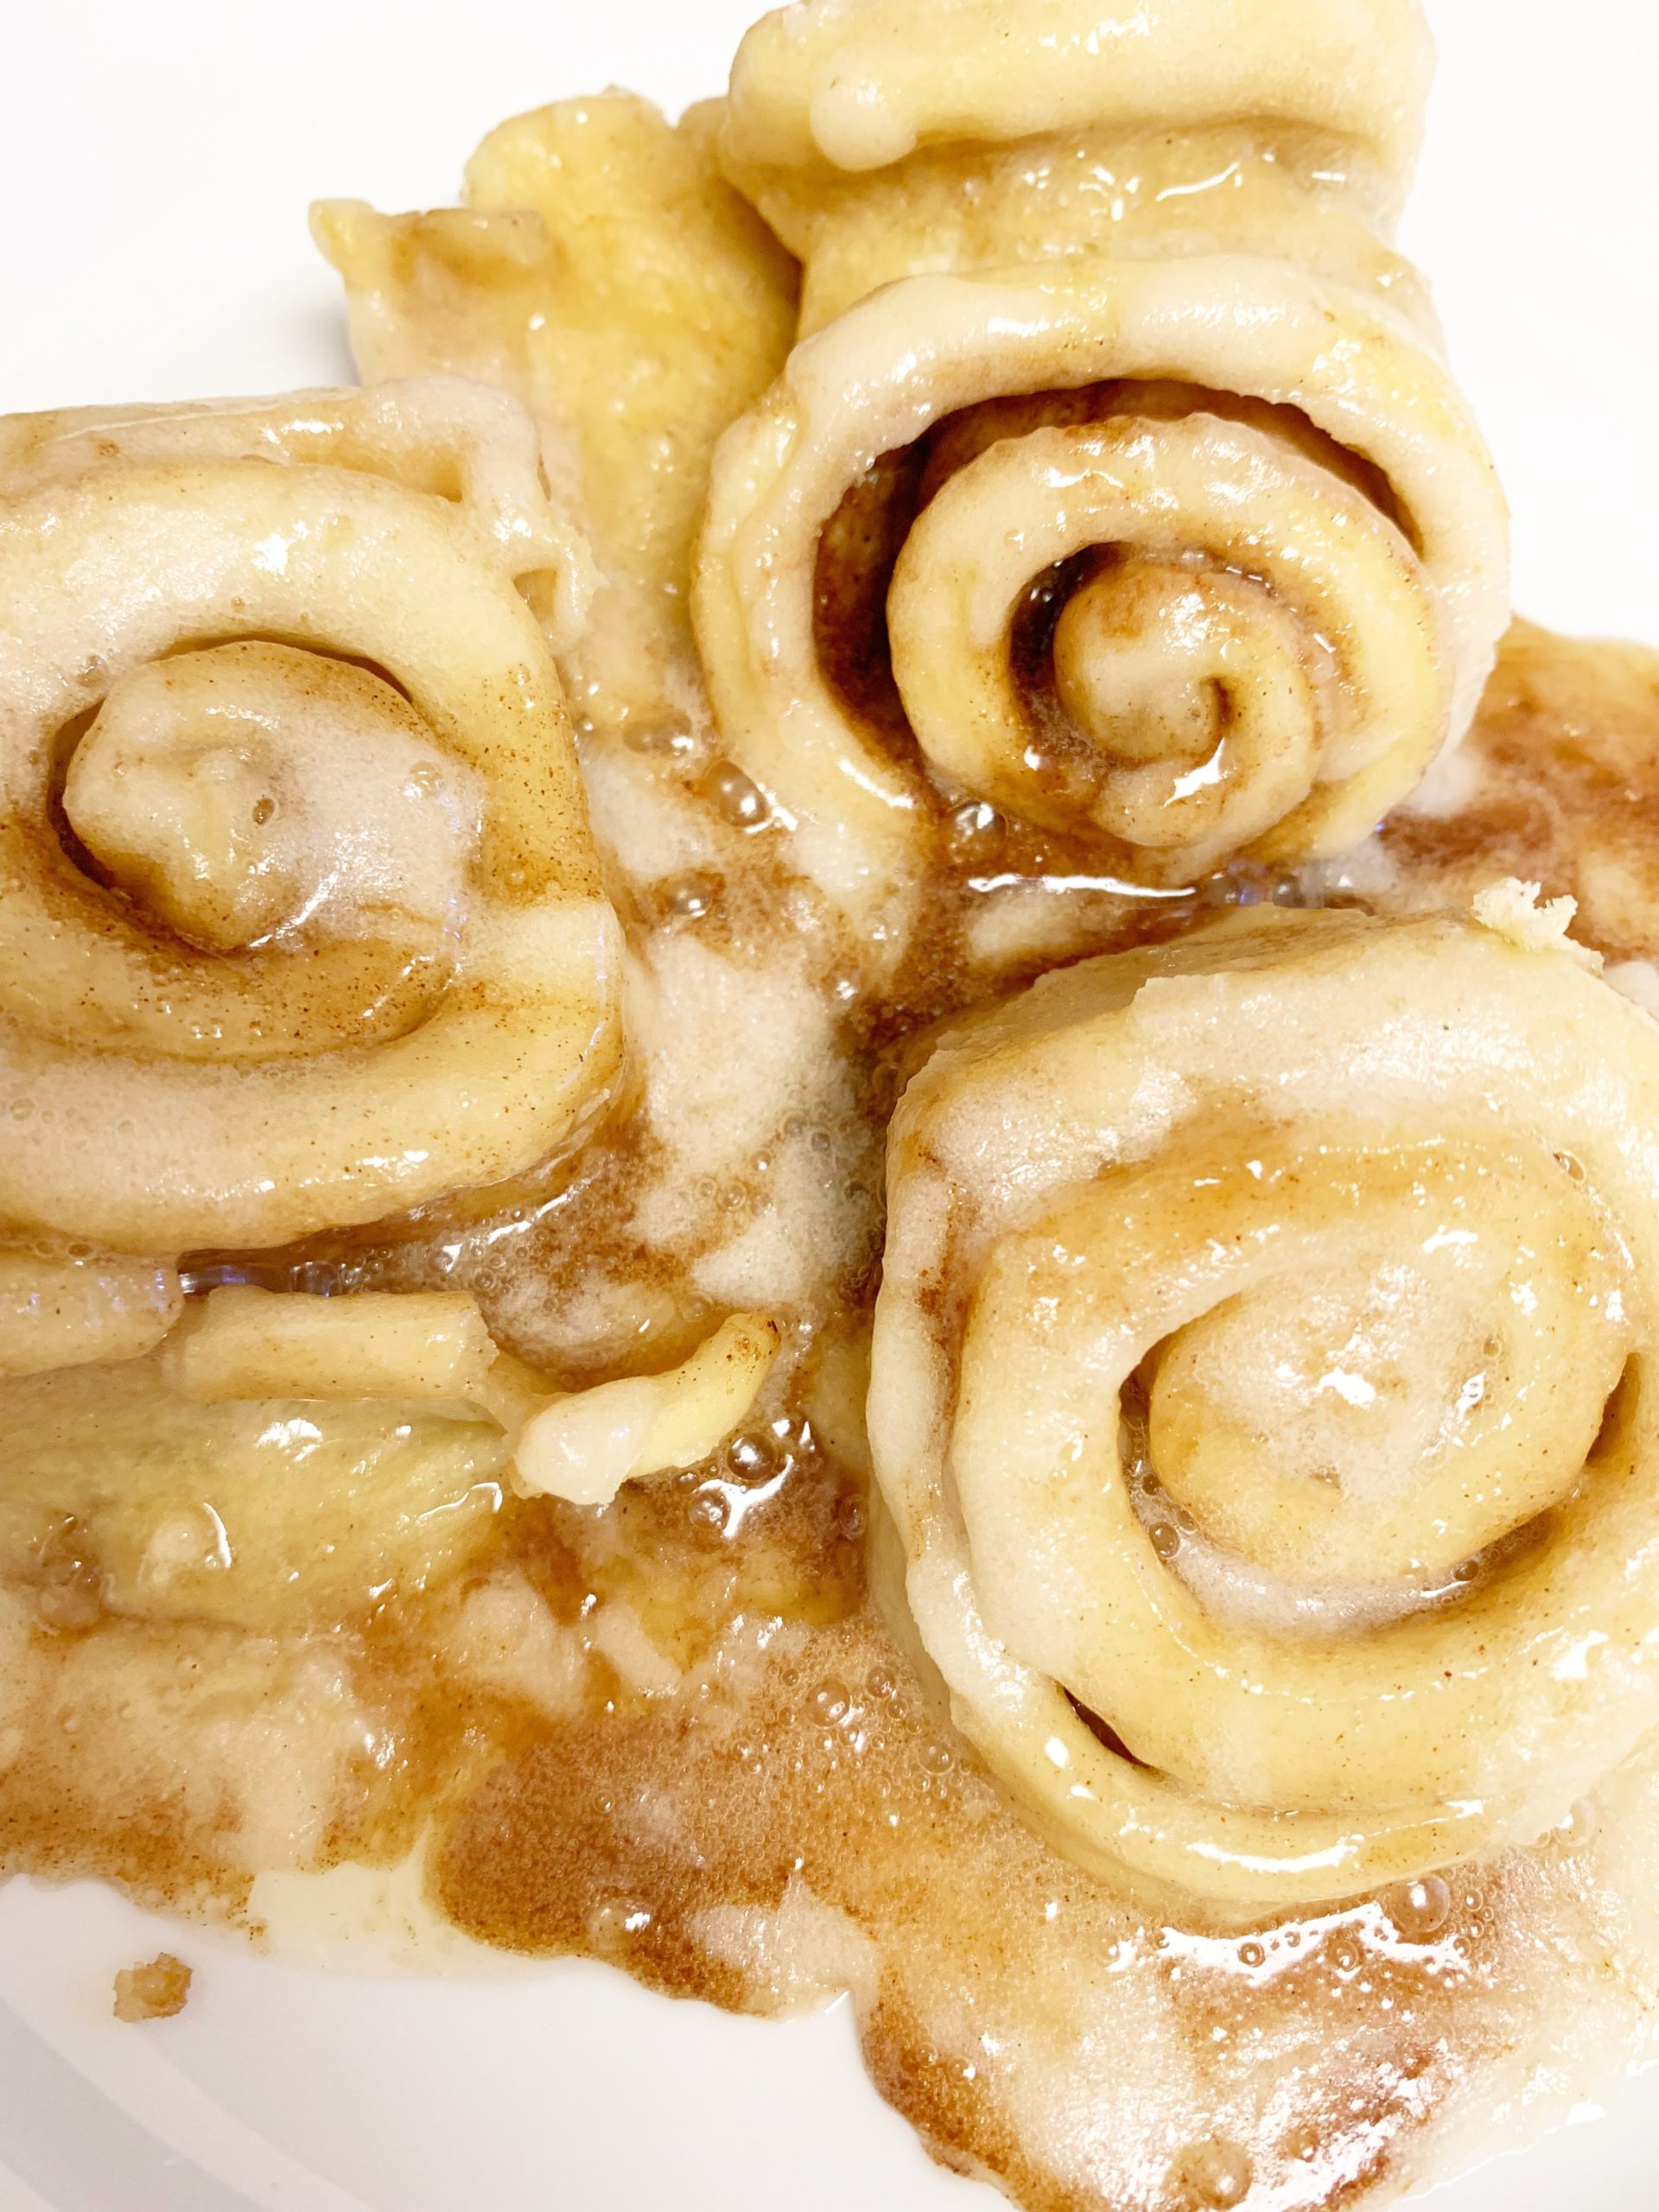 Easy Sourdough Cinnamon Rolls - An easy sourdough cinnamon rolls recipe using active sourdough starter discard instead of a yeast packet! | Sourdough Cinnamon Roll Recipe - Sourdough starter discard recipe - Homemade Sourdough Cinnamon Rolls 